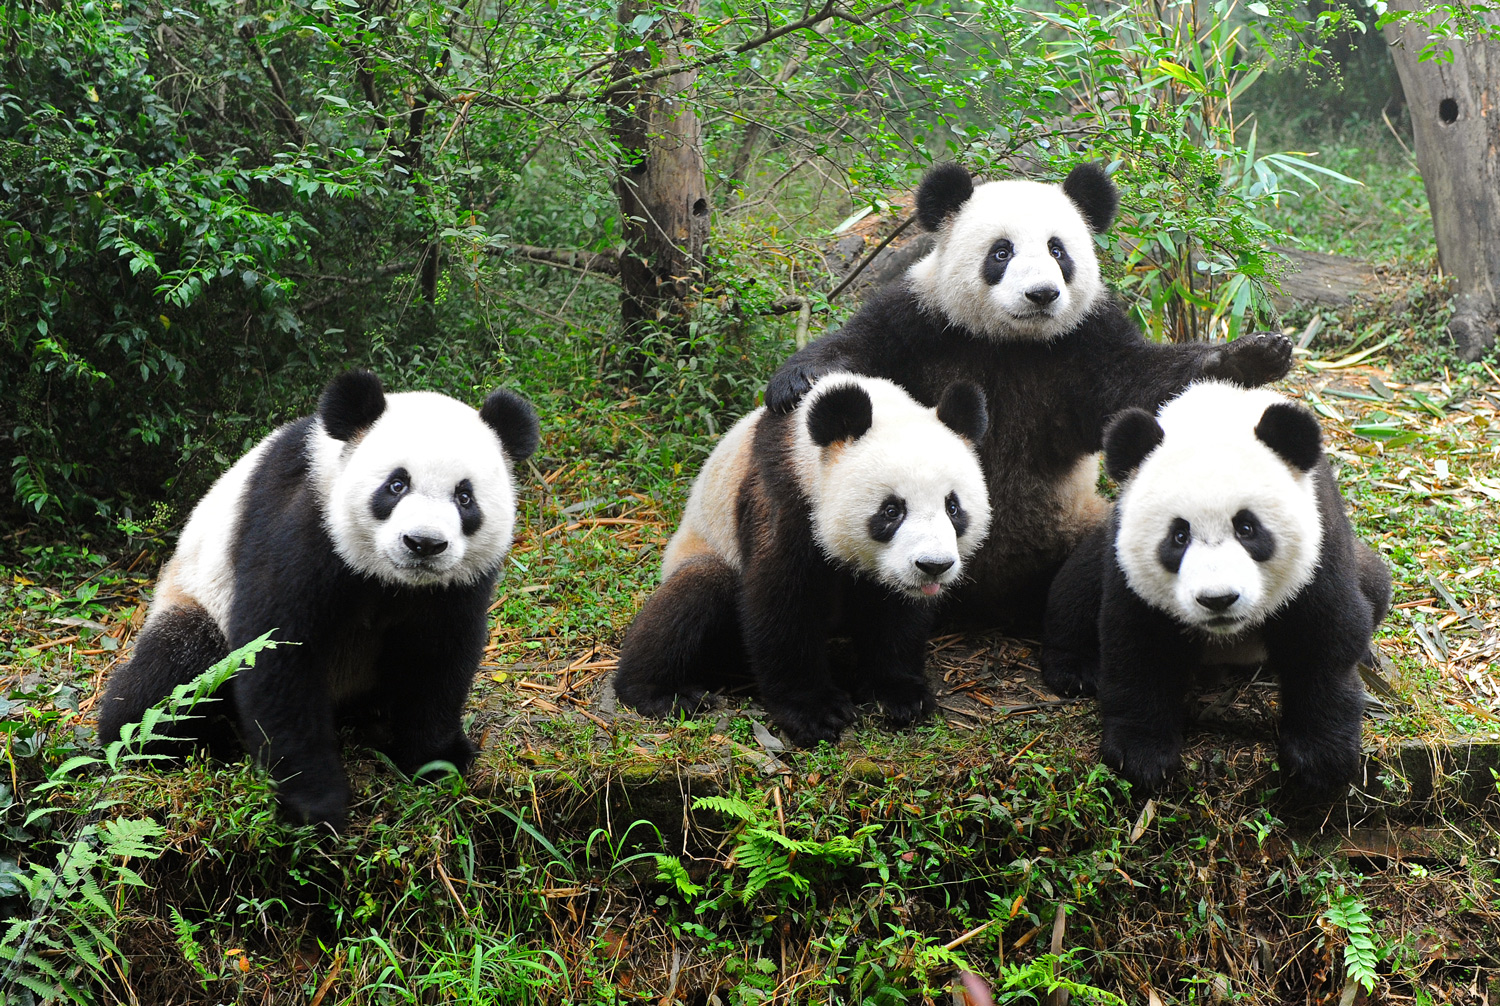 Four giant pandas in a wooded area